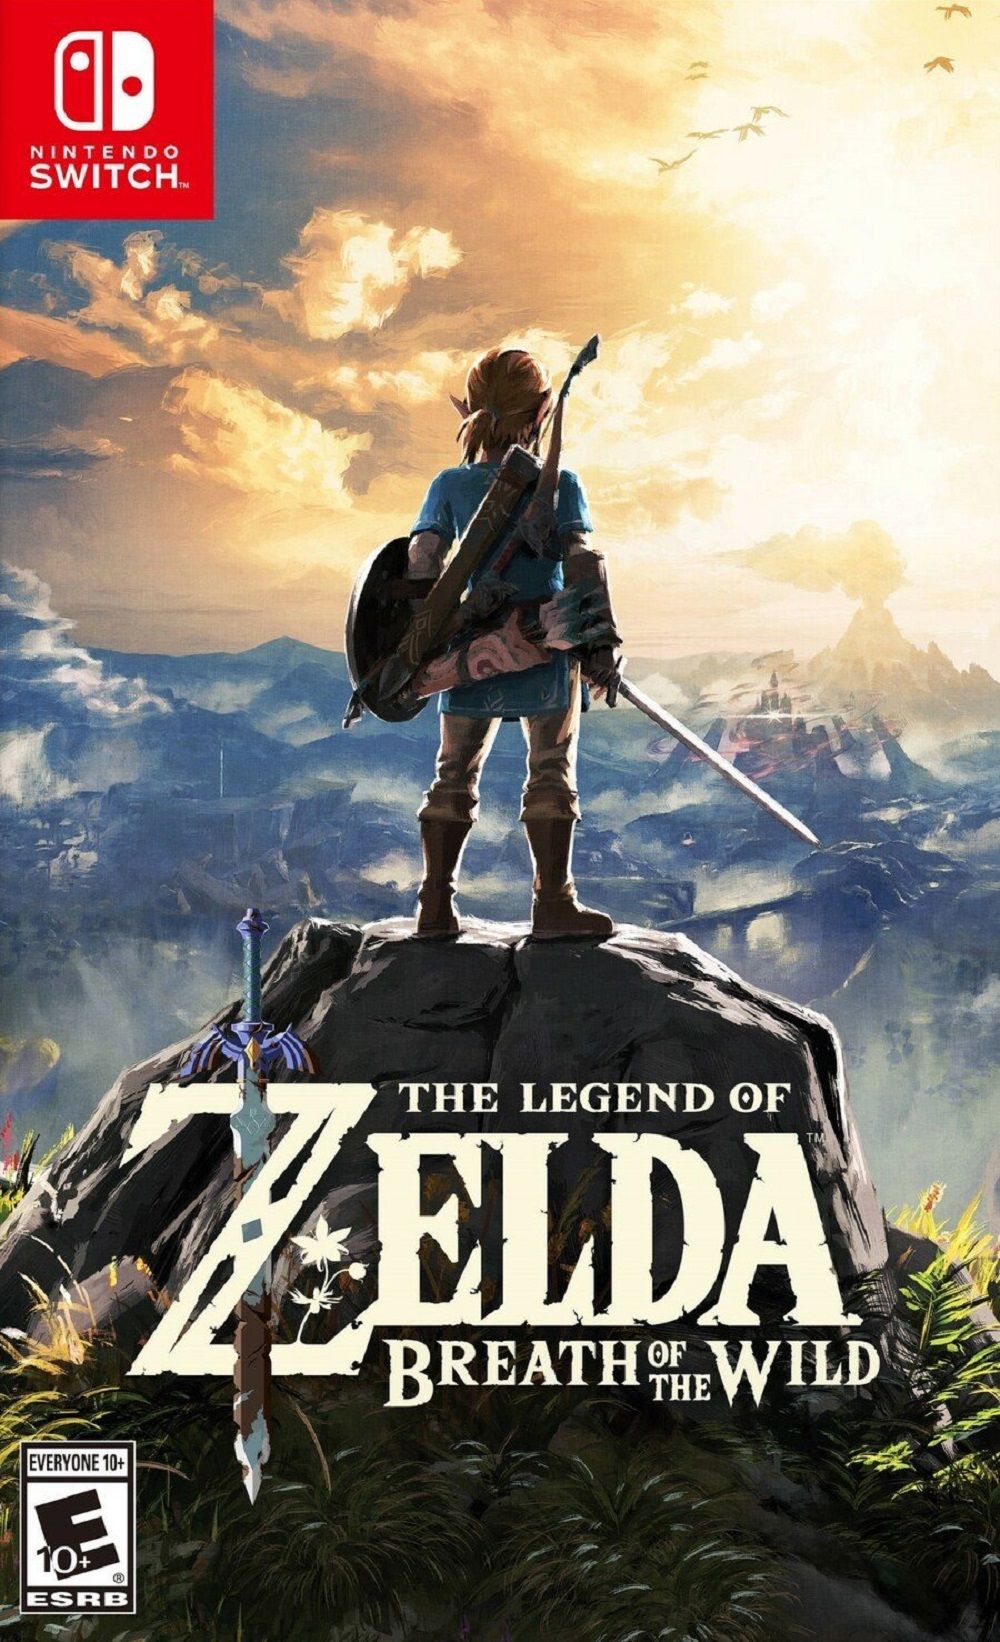 Cover art for Zelda: Breath of the Wild